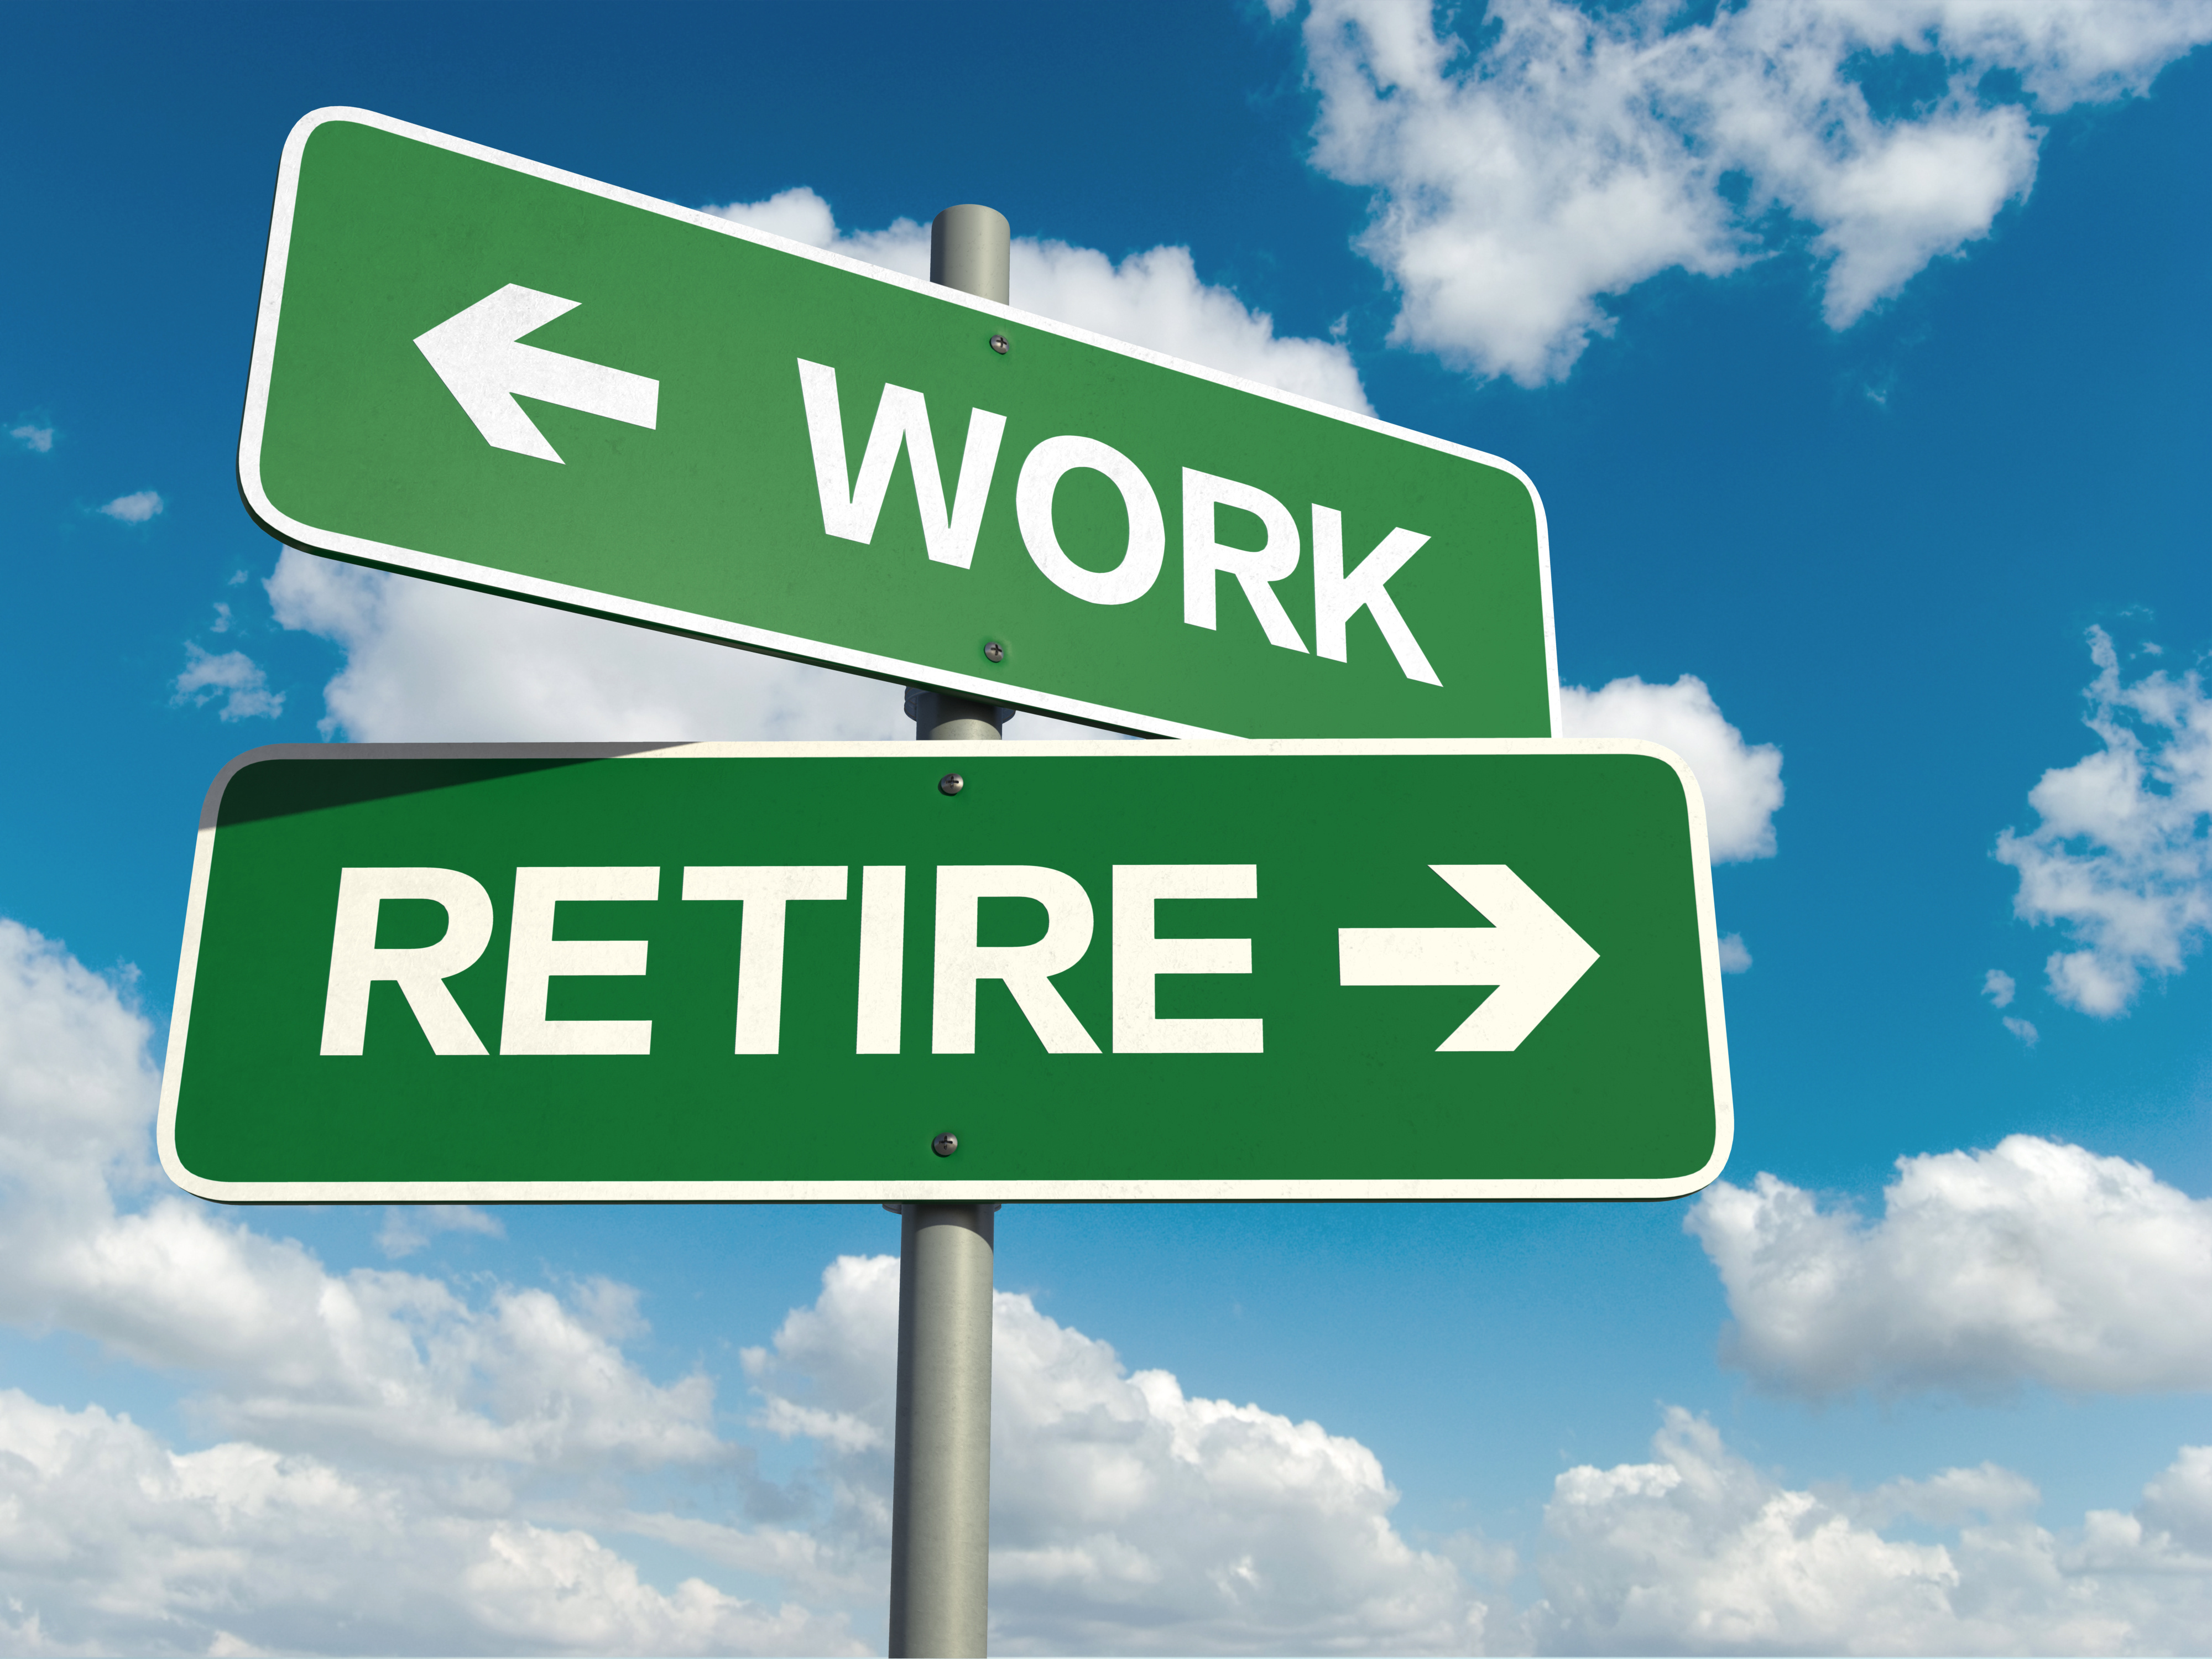 Are You Looking Online for Best Jobs for Retired People? - Avoid ...